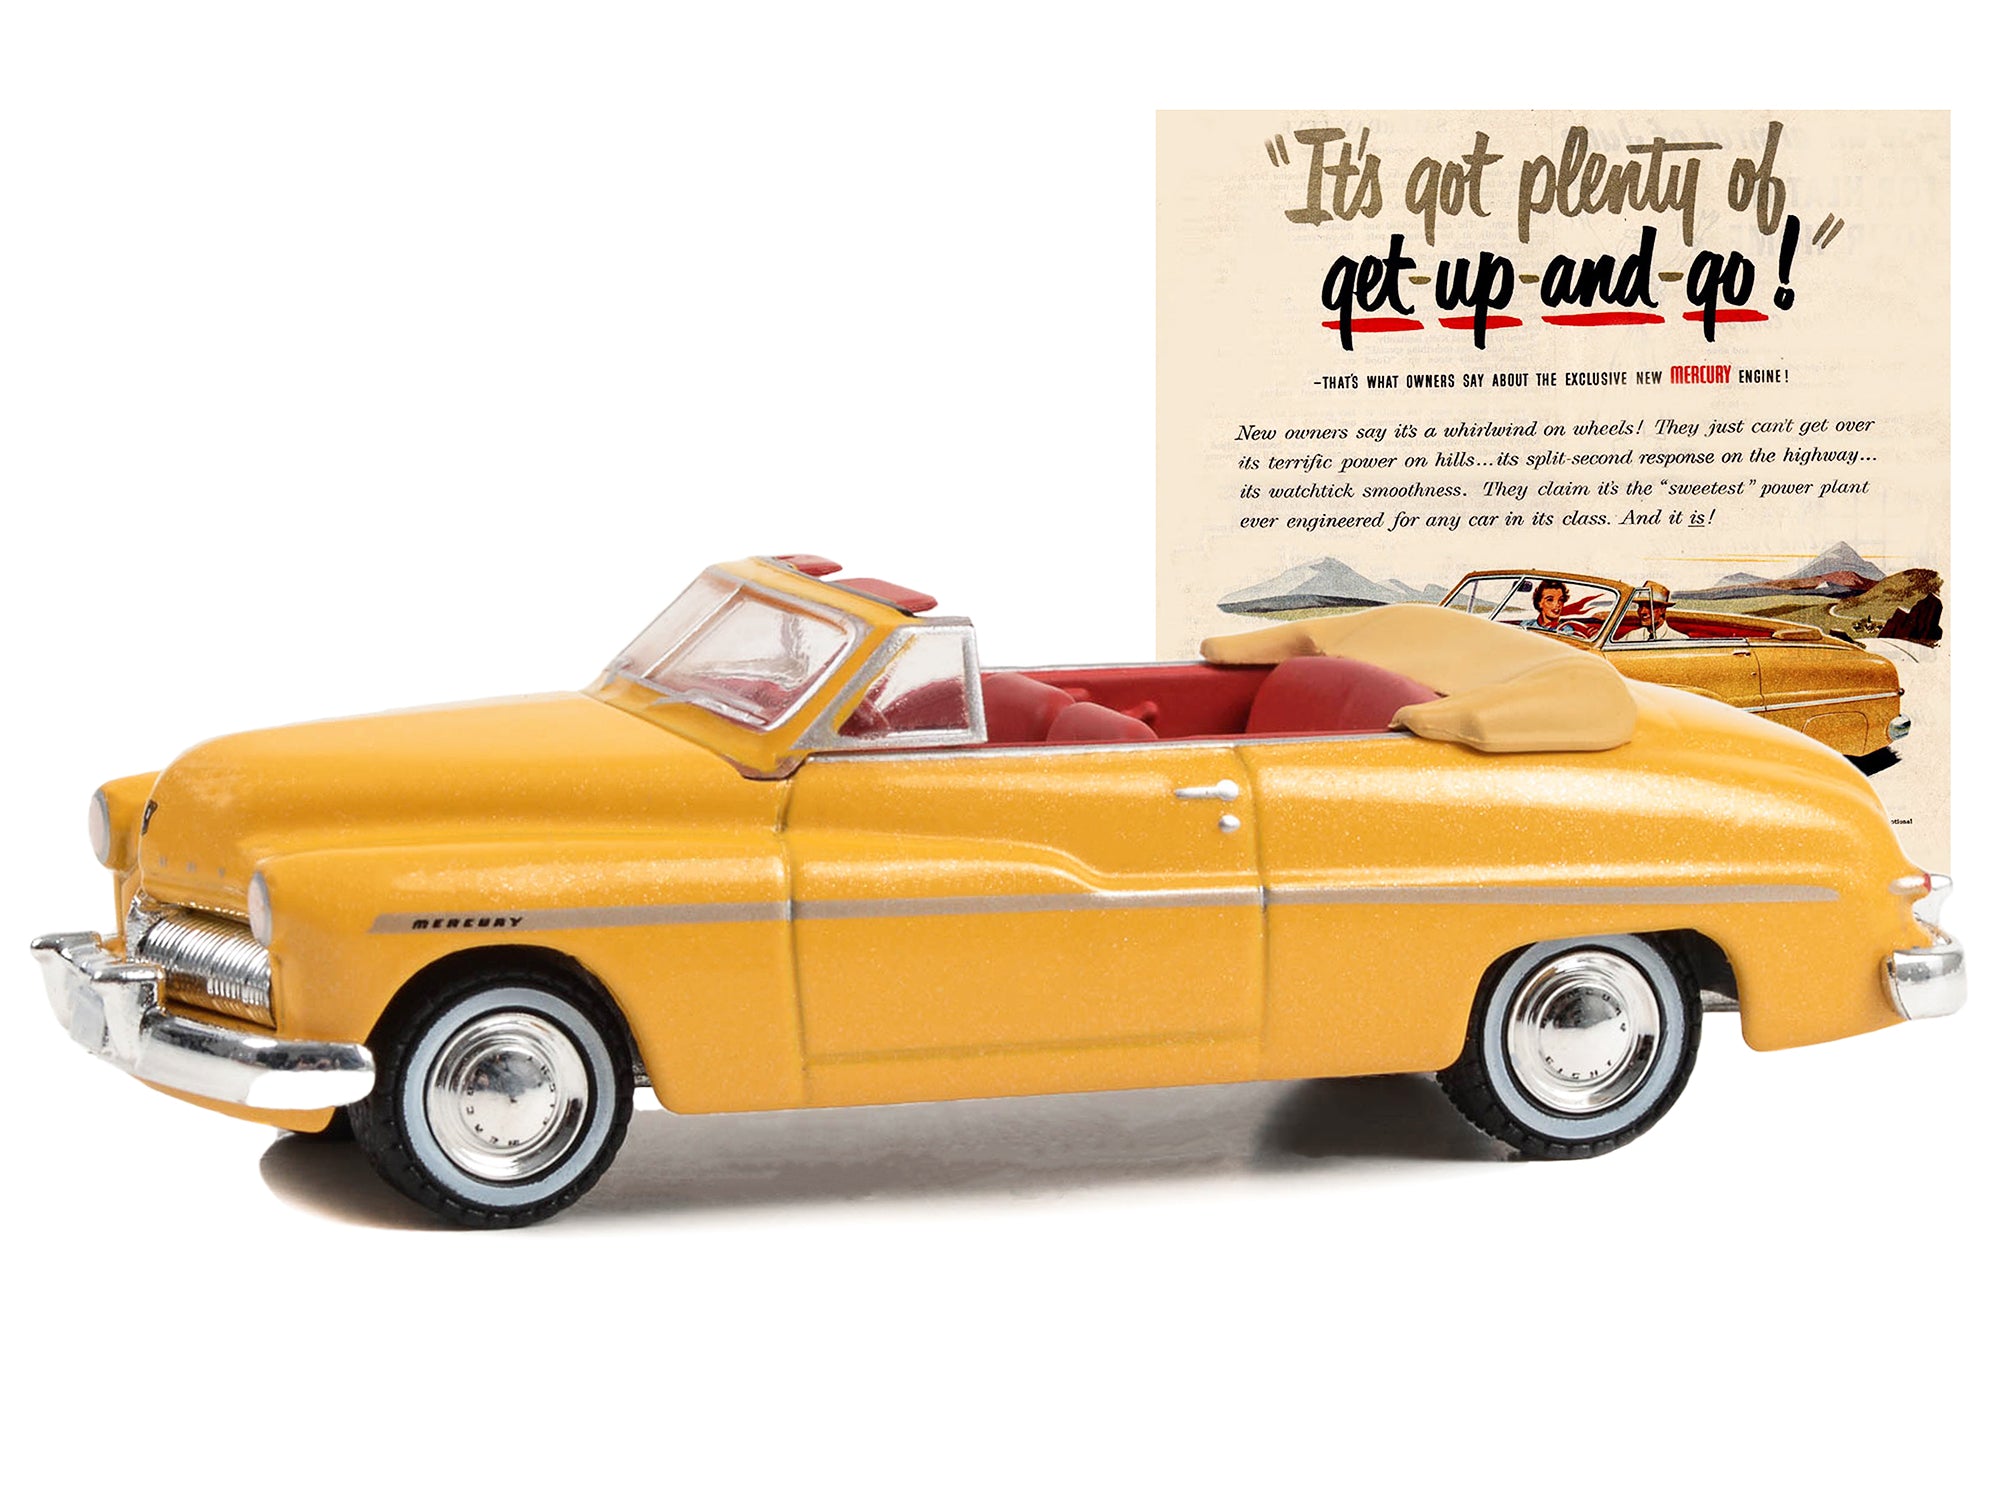 1949 Mercury Eight Convertible Yellow Metallic with Red Interior "It’s Got Plenty Of Get-Up-And-Go!" "Vintage Ad Cars" Series 9 1/64 Diecast Model Car by Greenlight